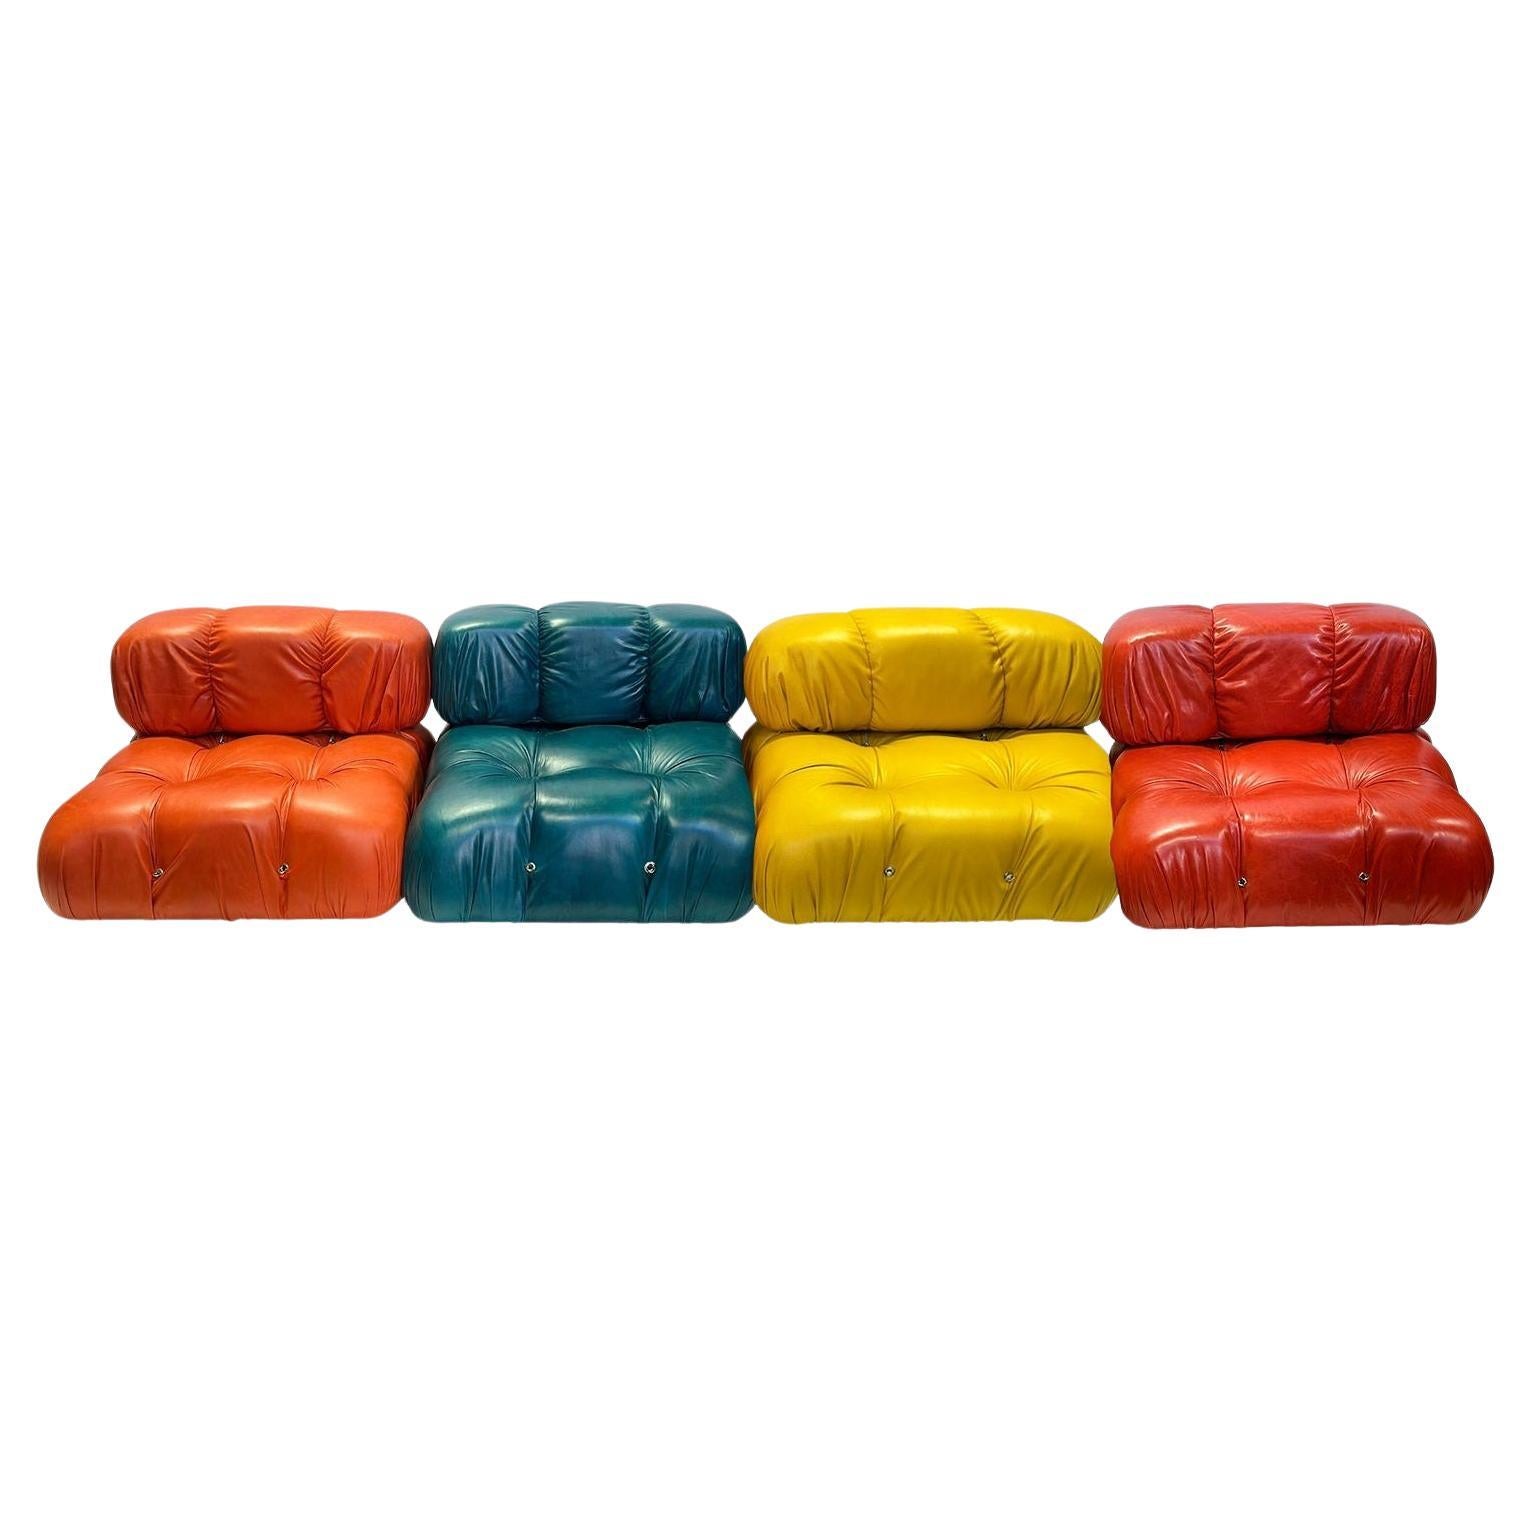 Colorful Mario Bellini Four -Seat Leather Sectional Sofa, 1970's For Sale